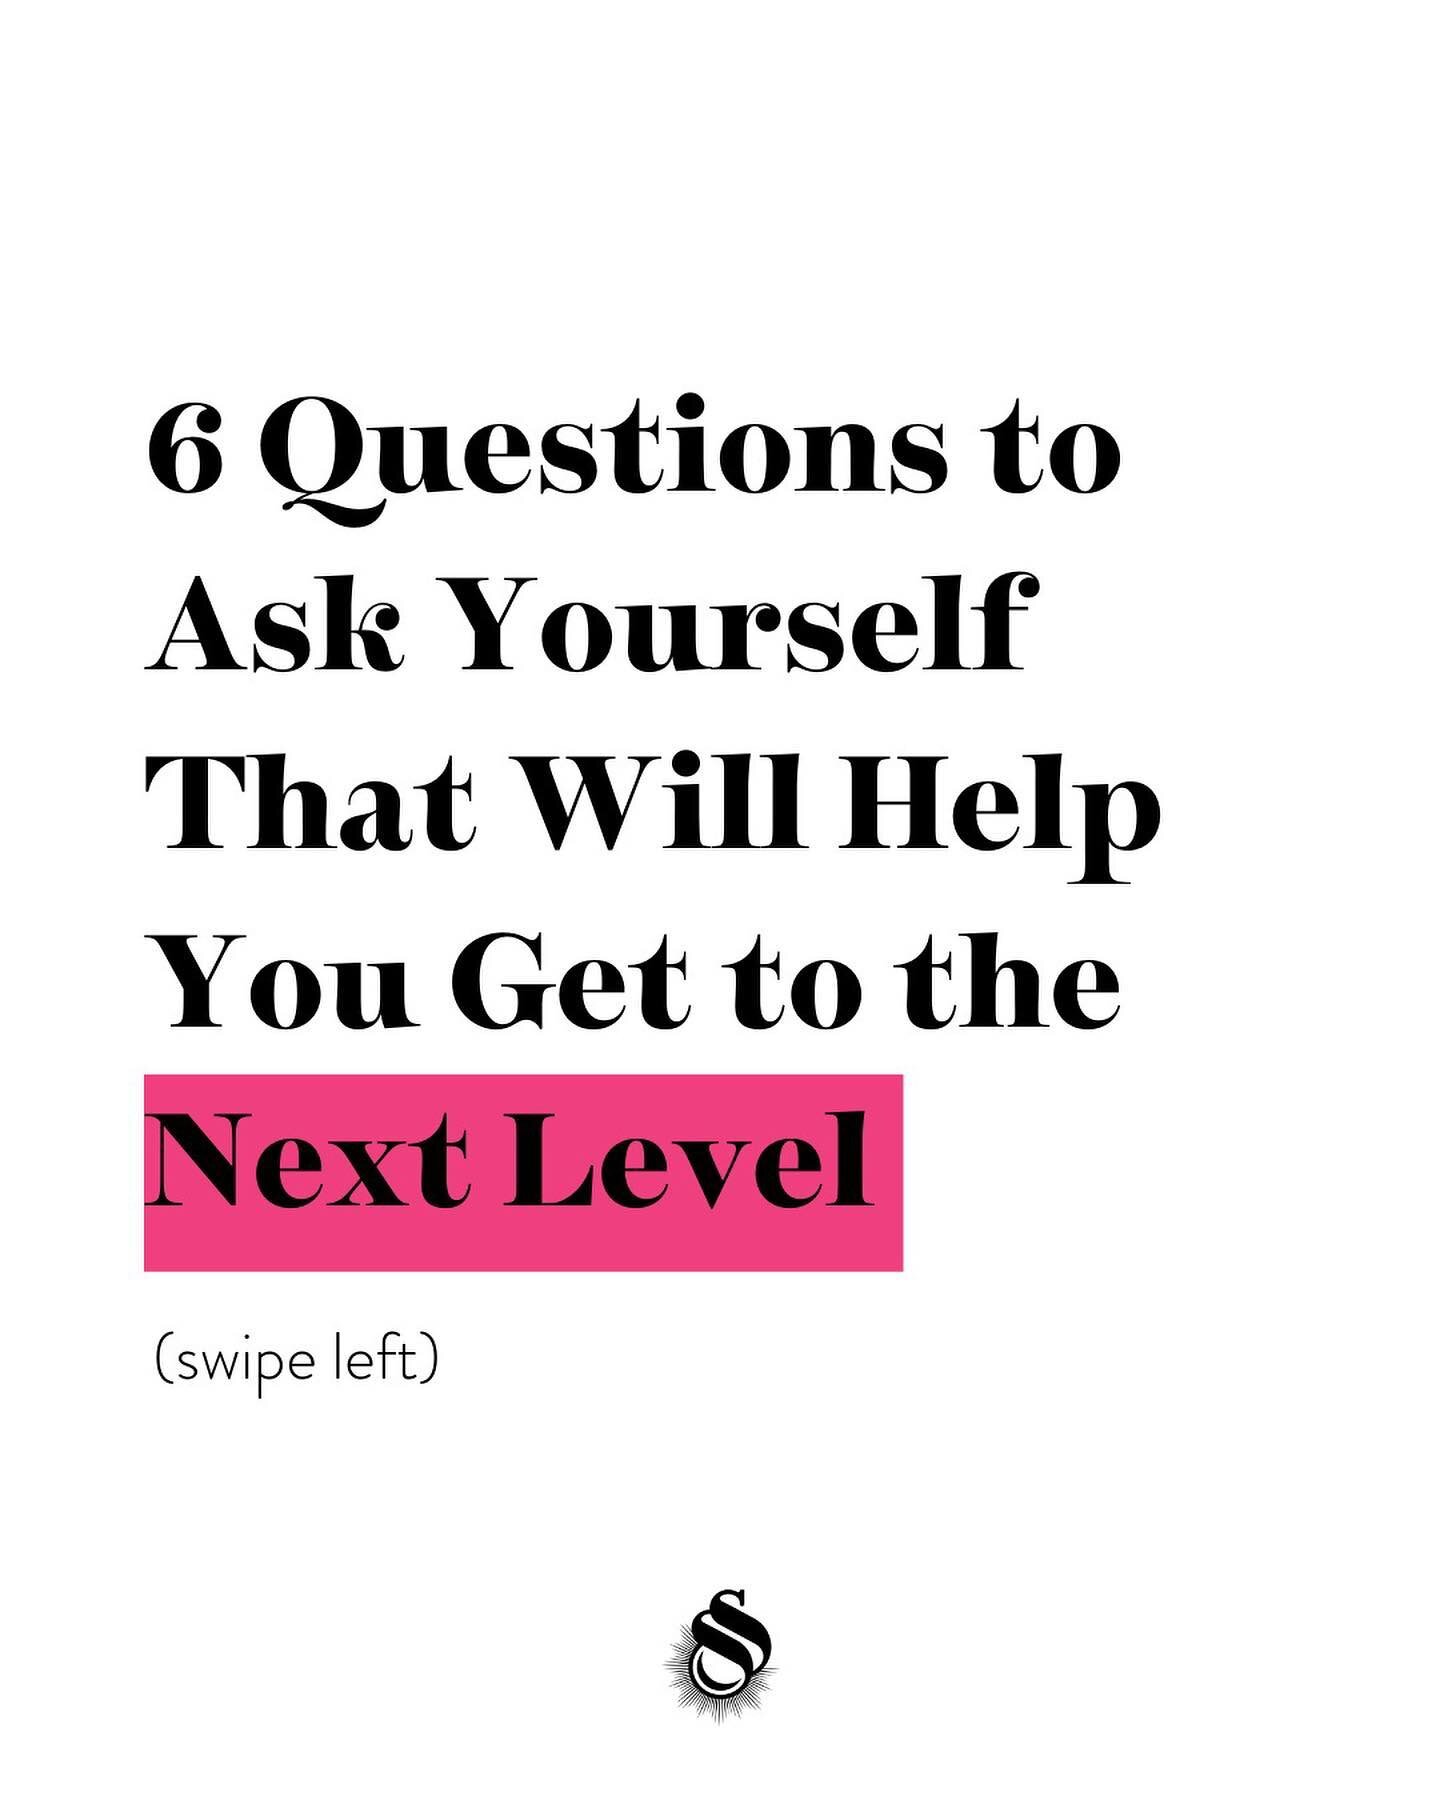 6 Questions to Ask Yourself That Will Help You Get to the Next Level This Year:

1️⃣ Do I sense and trust my intuition?

2️⃣ What do I want to accomplish in my business and in my personal life?

3️⃣ How am I feeling in my business right now?

4️⃣ Whe